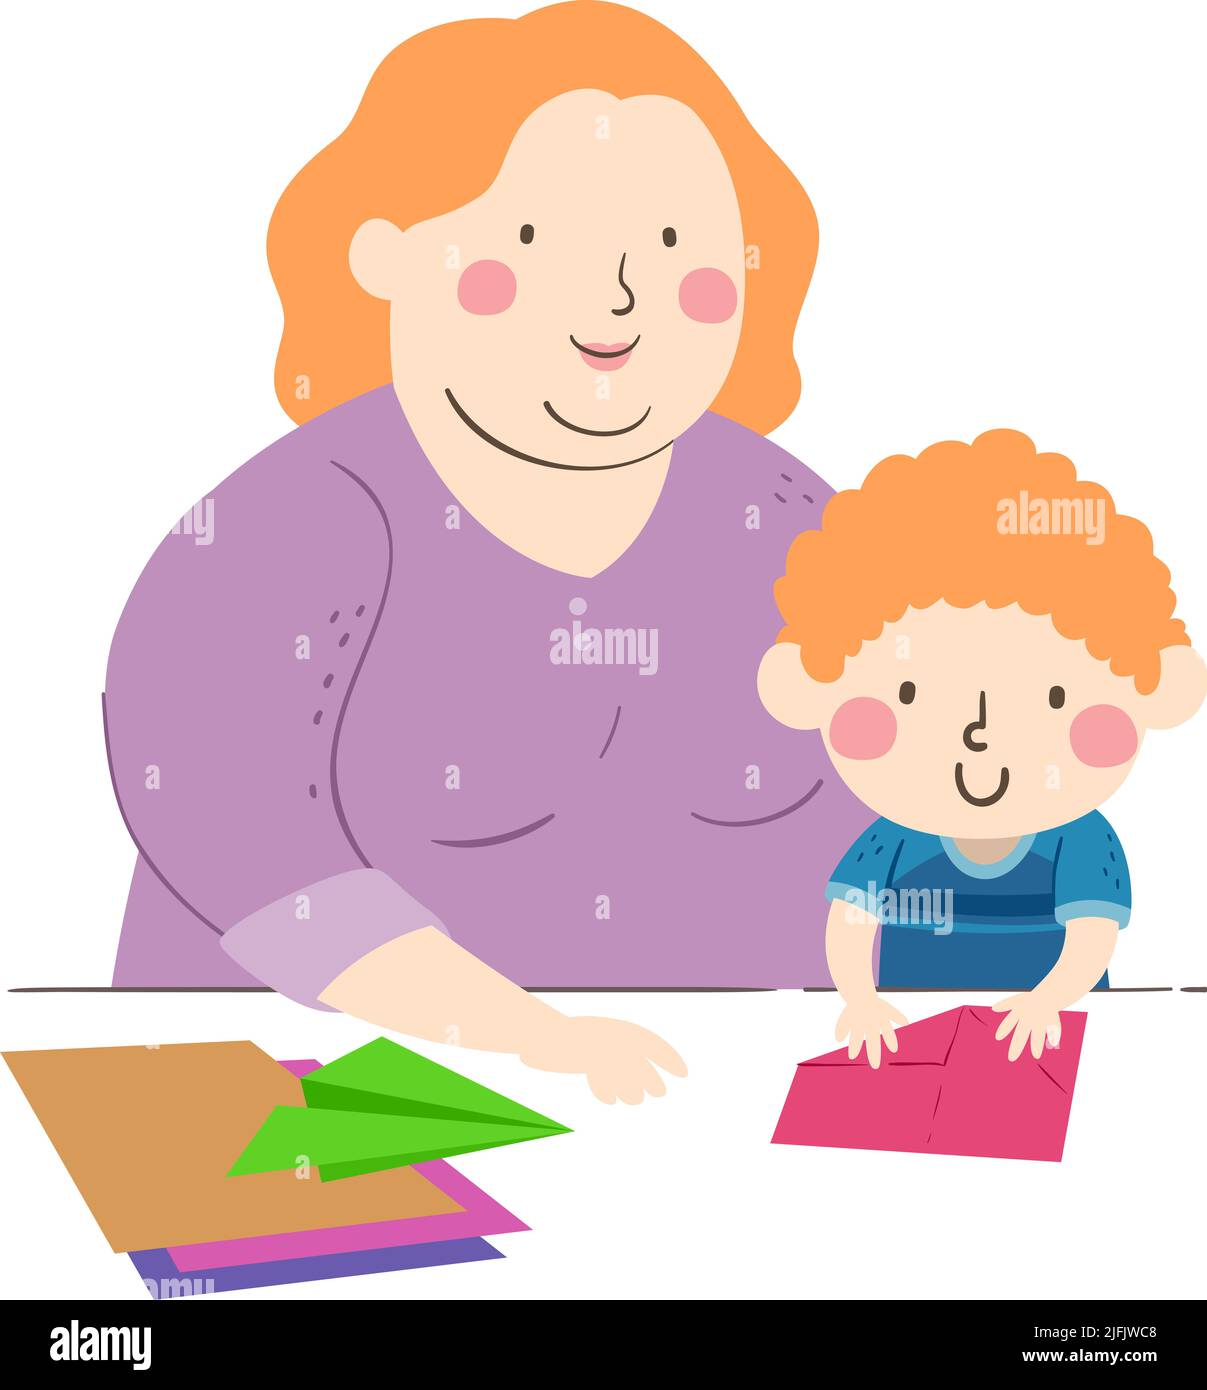 Illustration of Kid Boy Folding Paper and Mother Teaches How to Make Paper Airplane Using Colored Papers. Origami Stock Photo